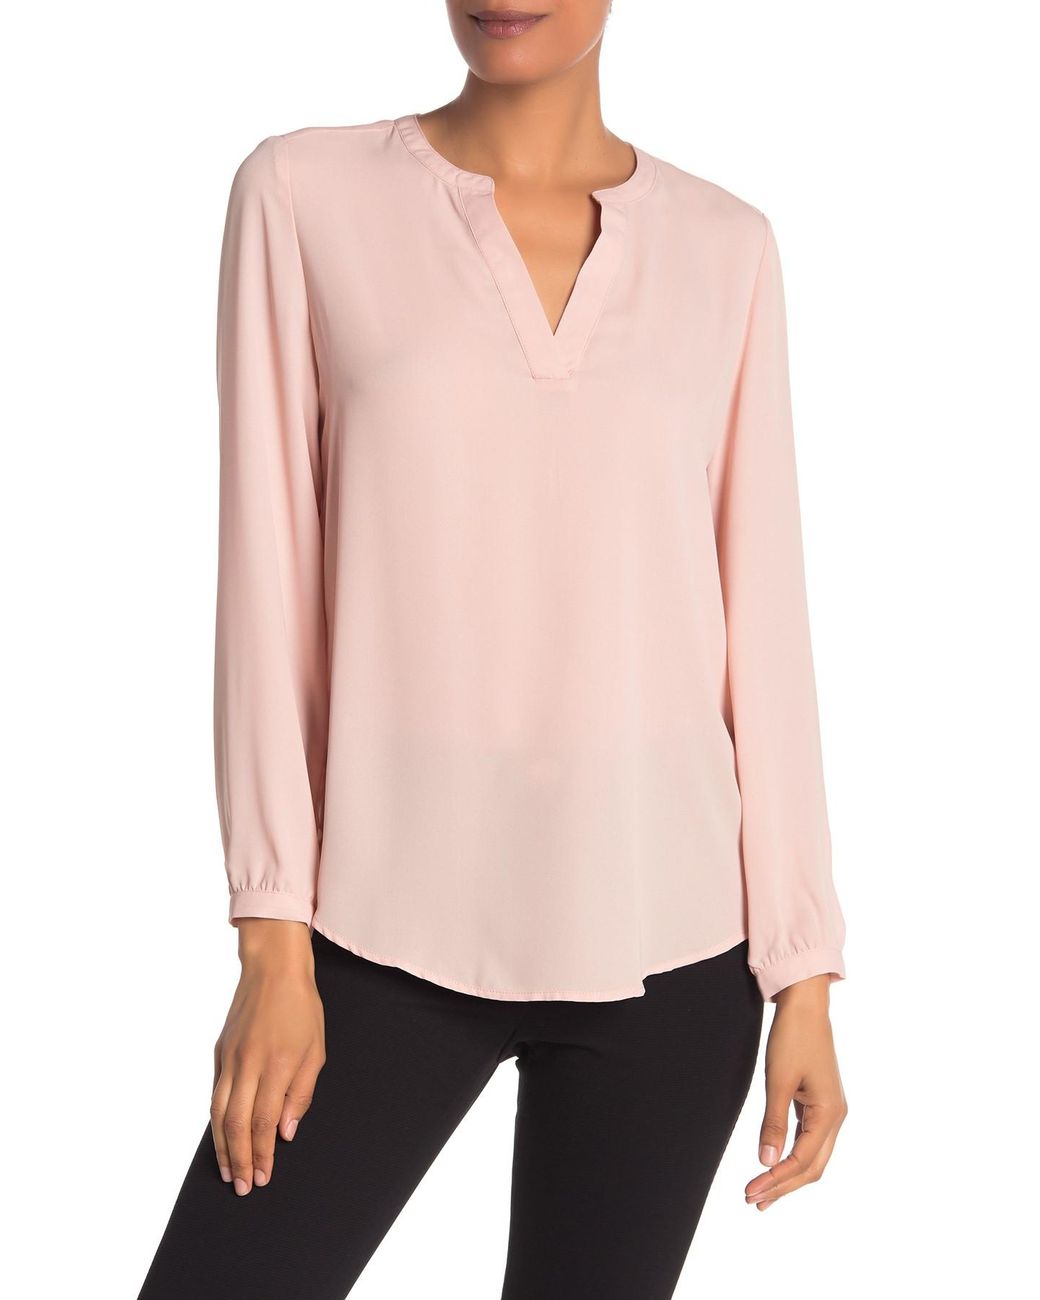 Adrianna Papell Split Neck Long Sleeve Blouse in Pink